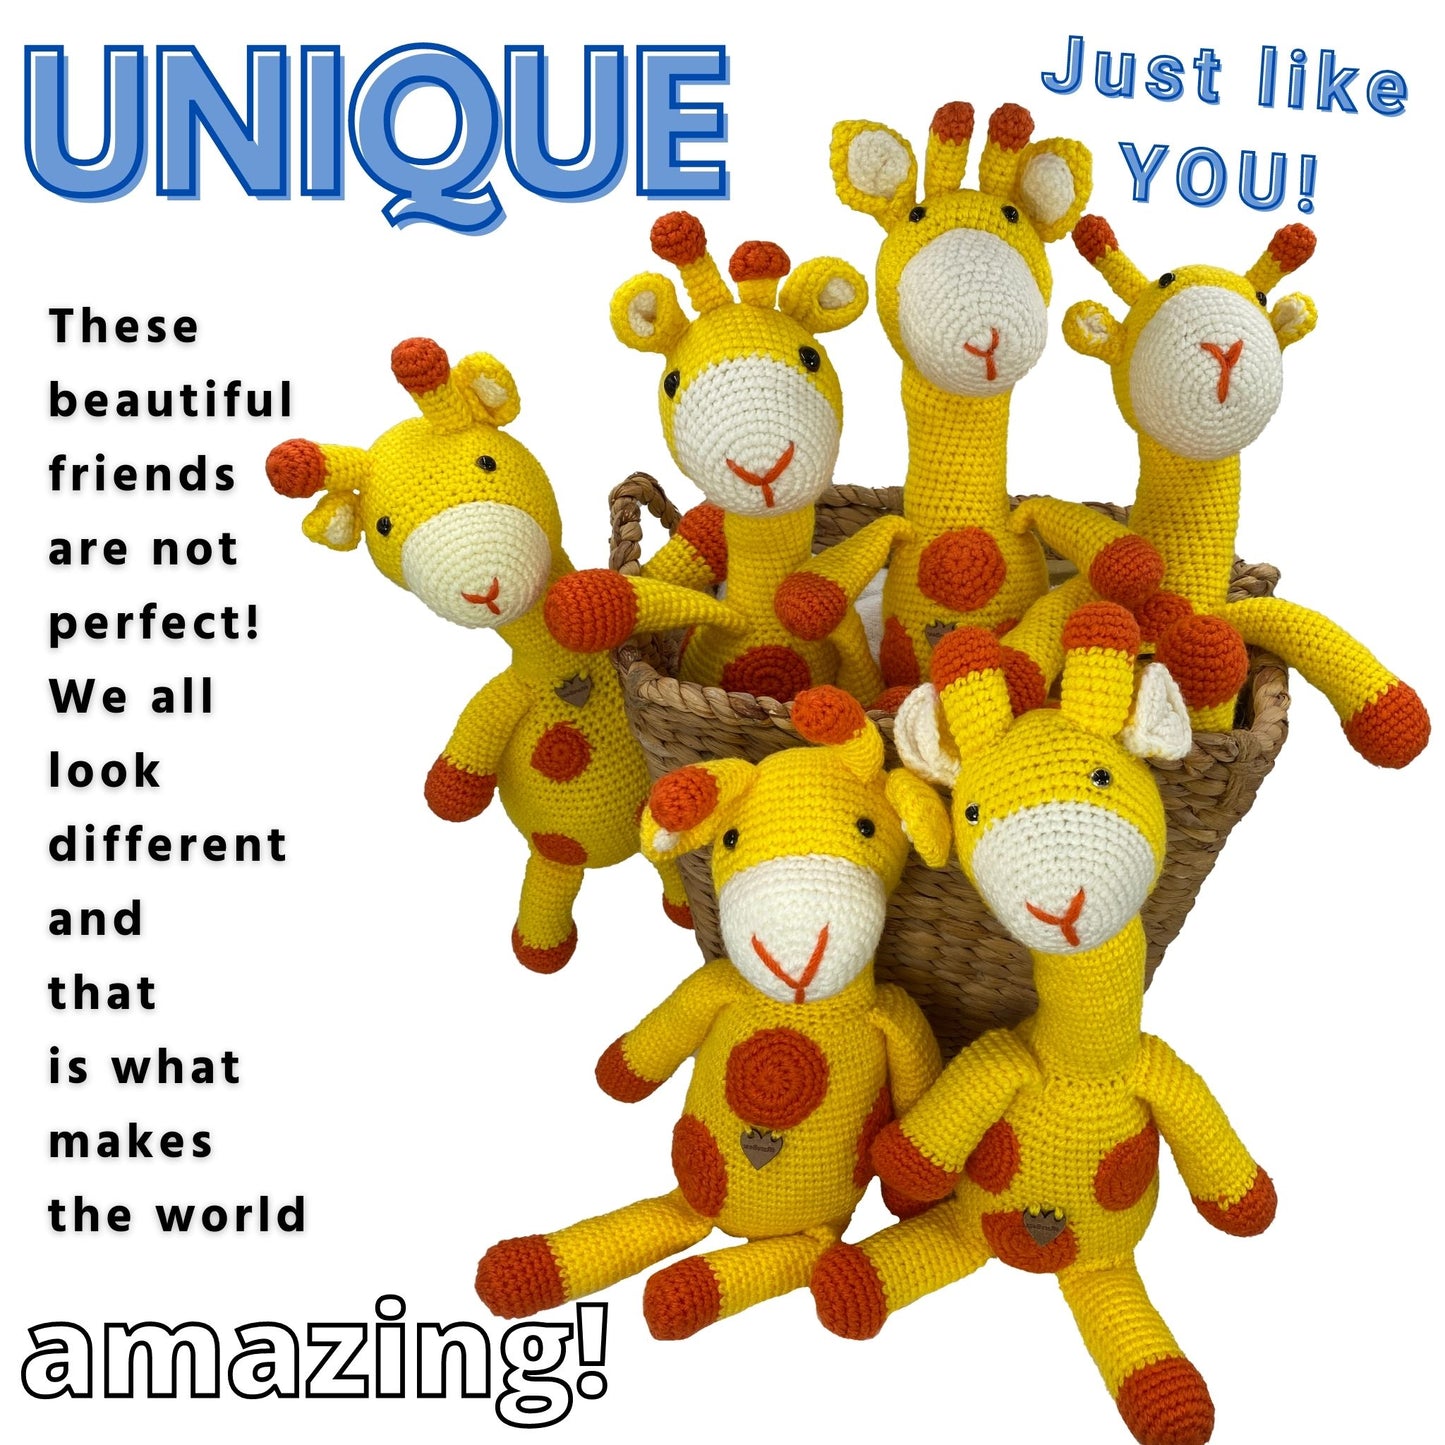 Giraffe - Handmade in South Africa by the ladies from Rare Bears Charity